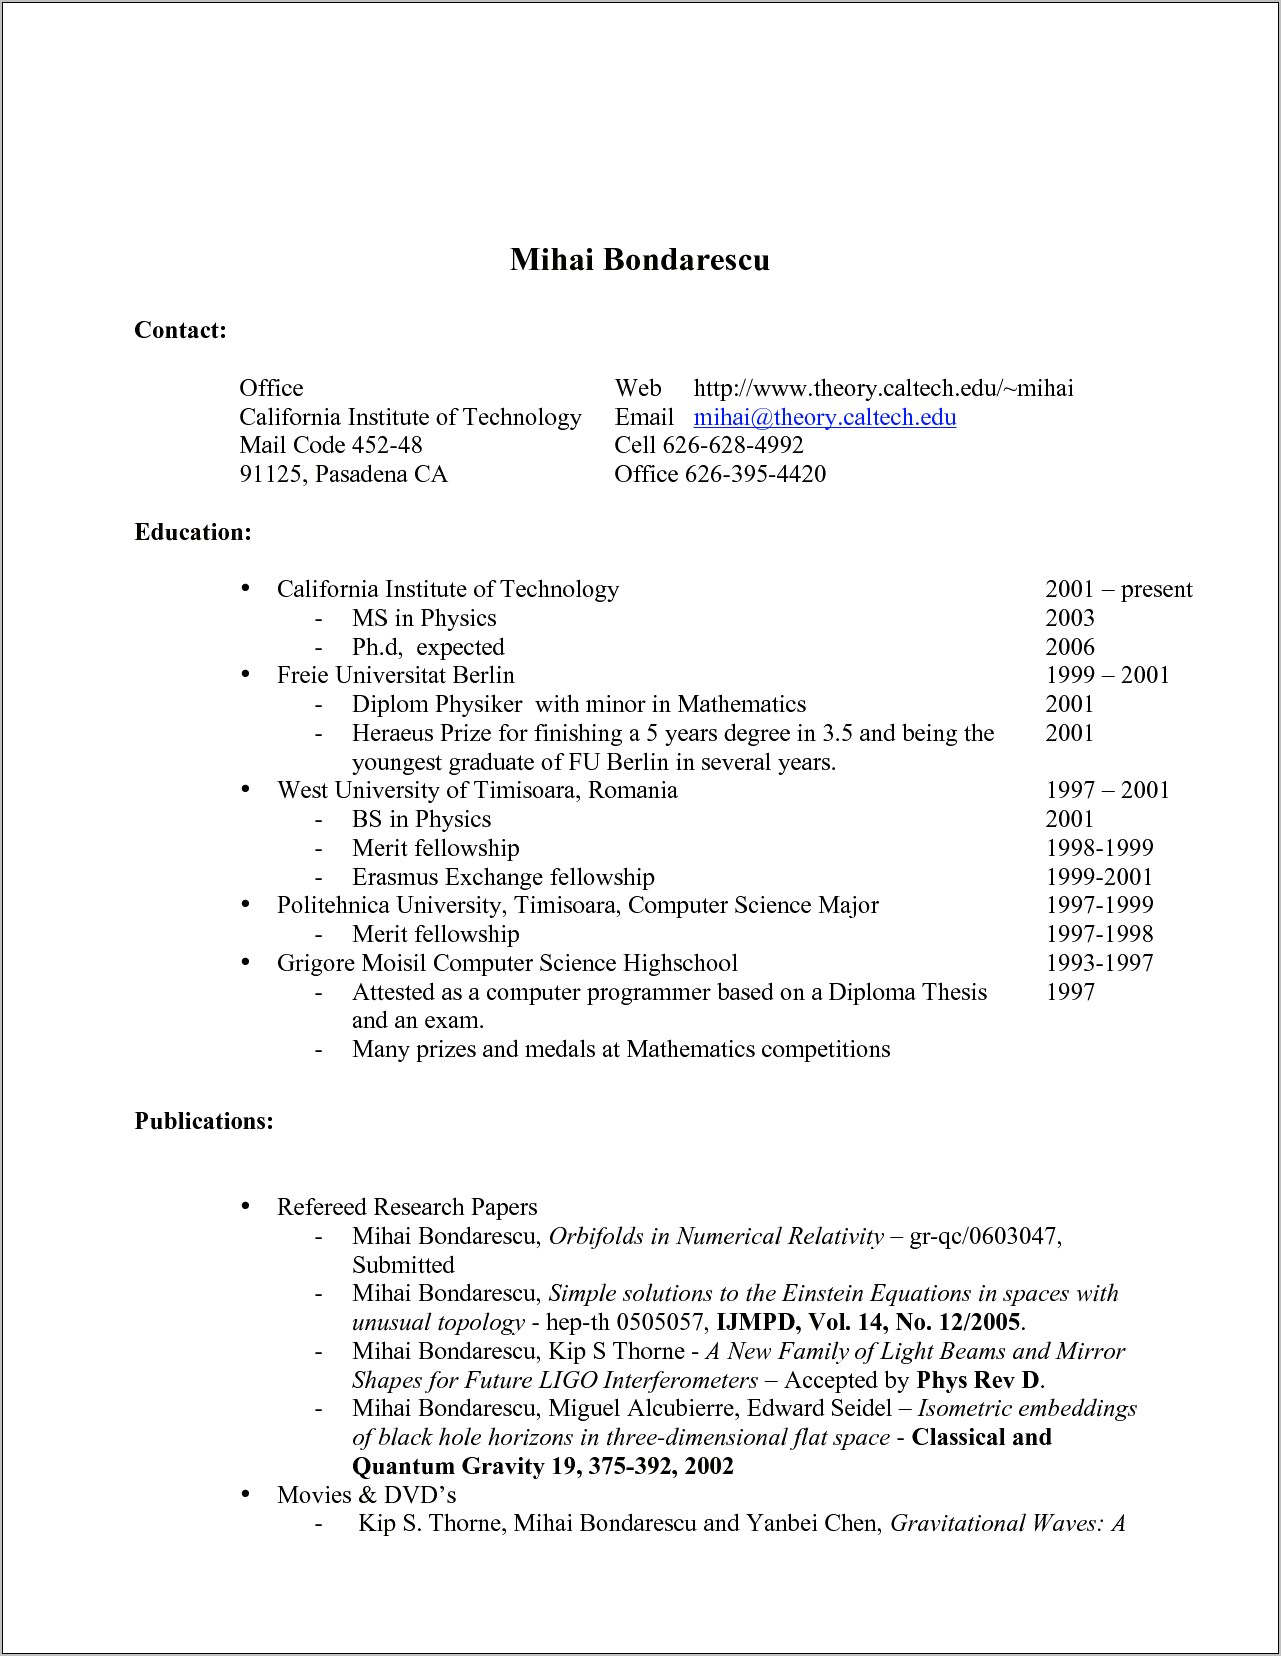 Resumes Examples High School Student